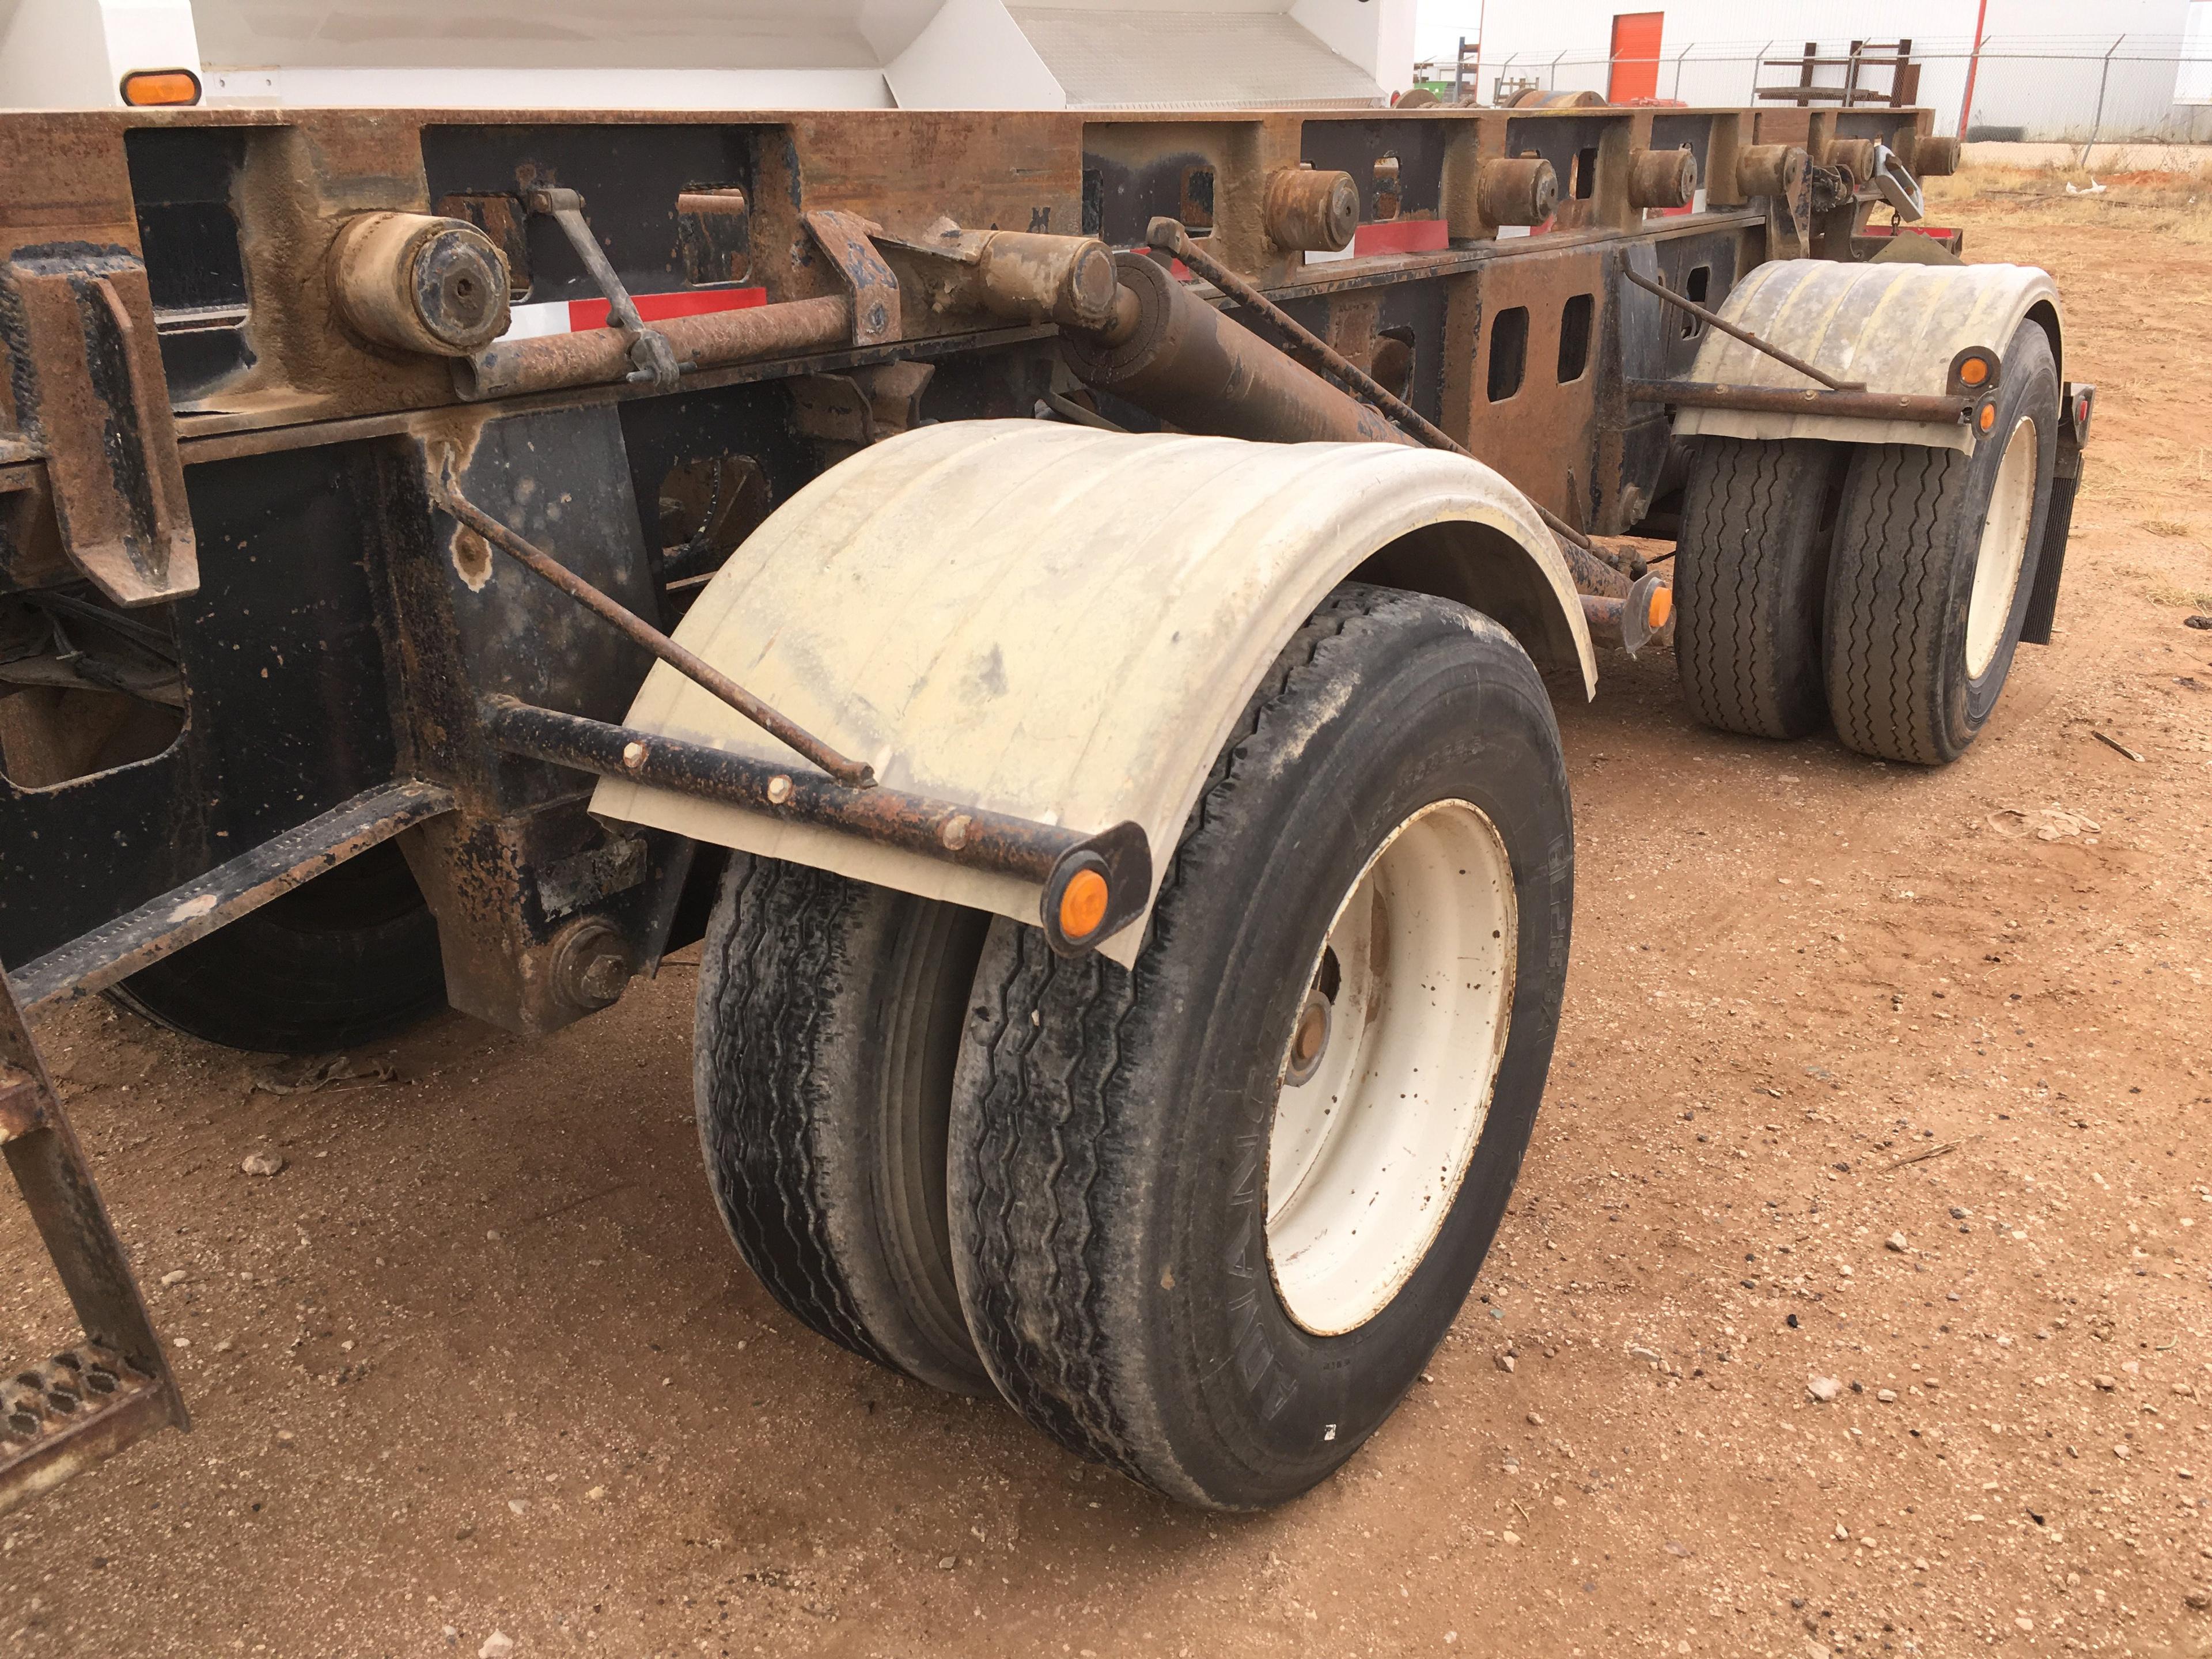 1998 Environmental Service Products Spread Axle Roll-Off Trailer [Yard 1: Odessa]